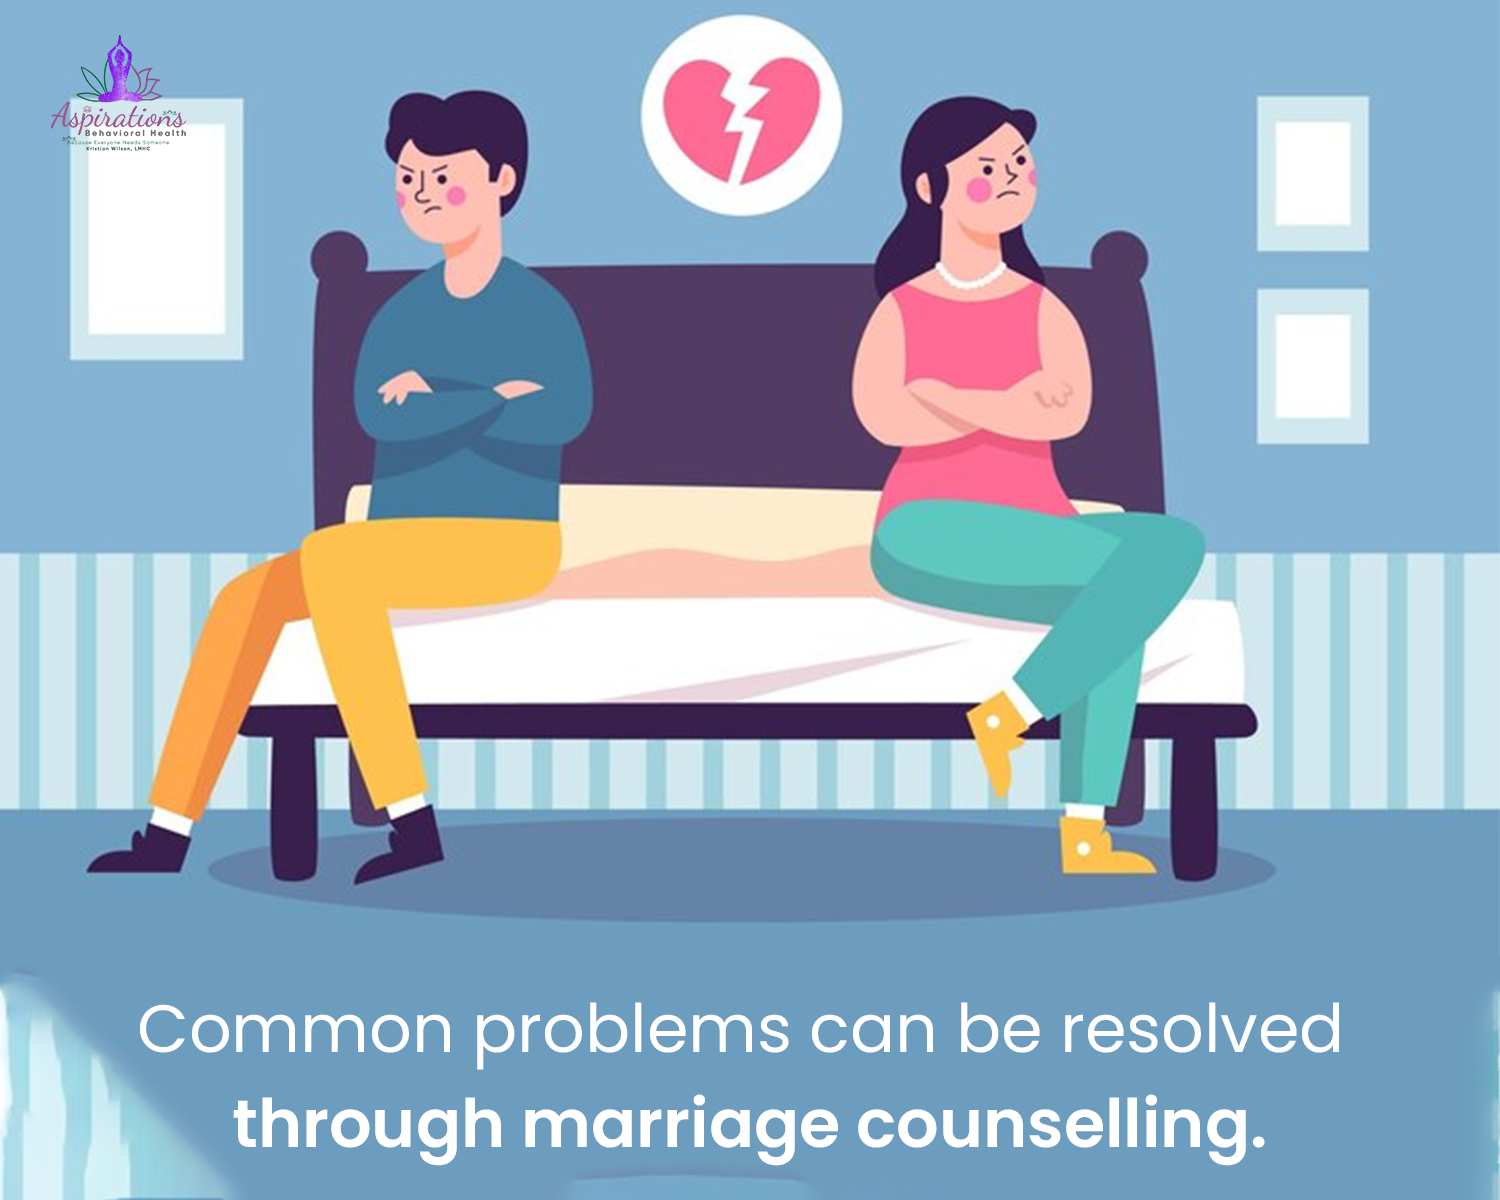 Common problems can be resolved through marriage counseling